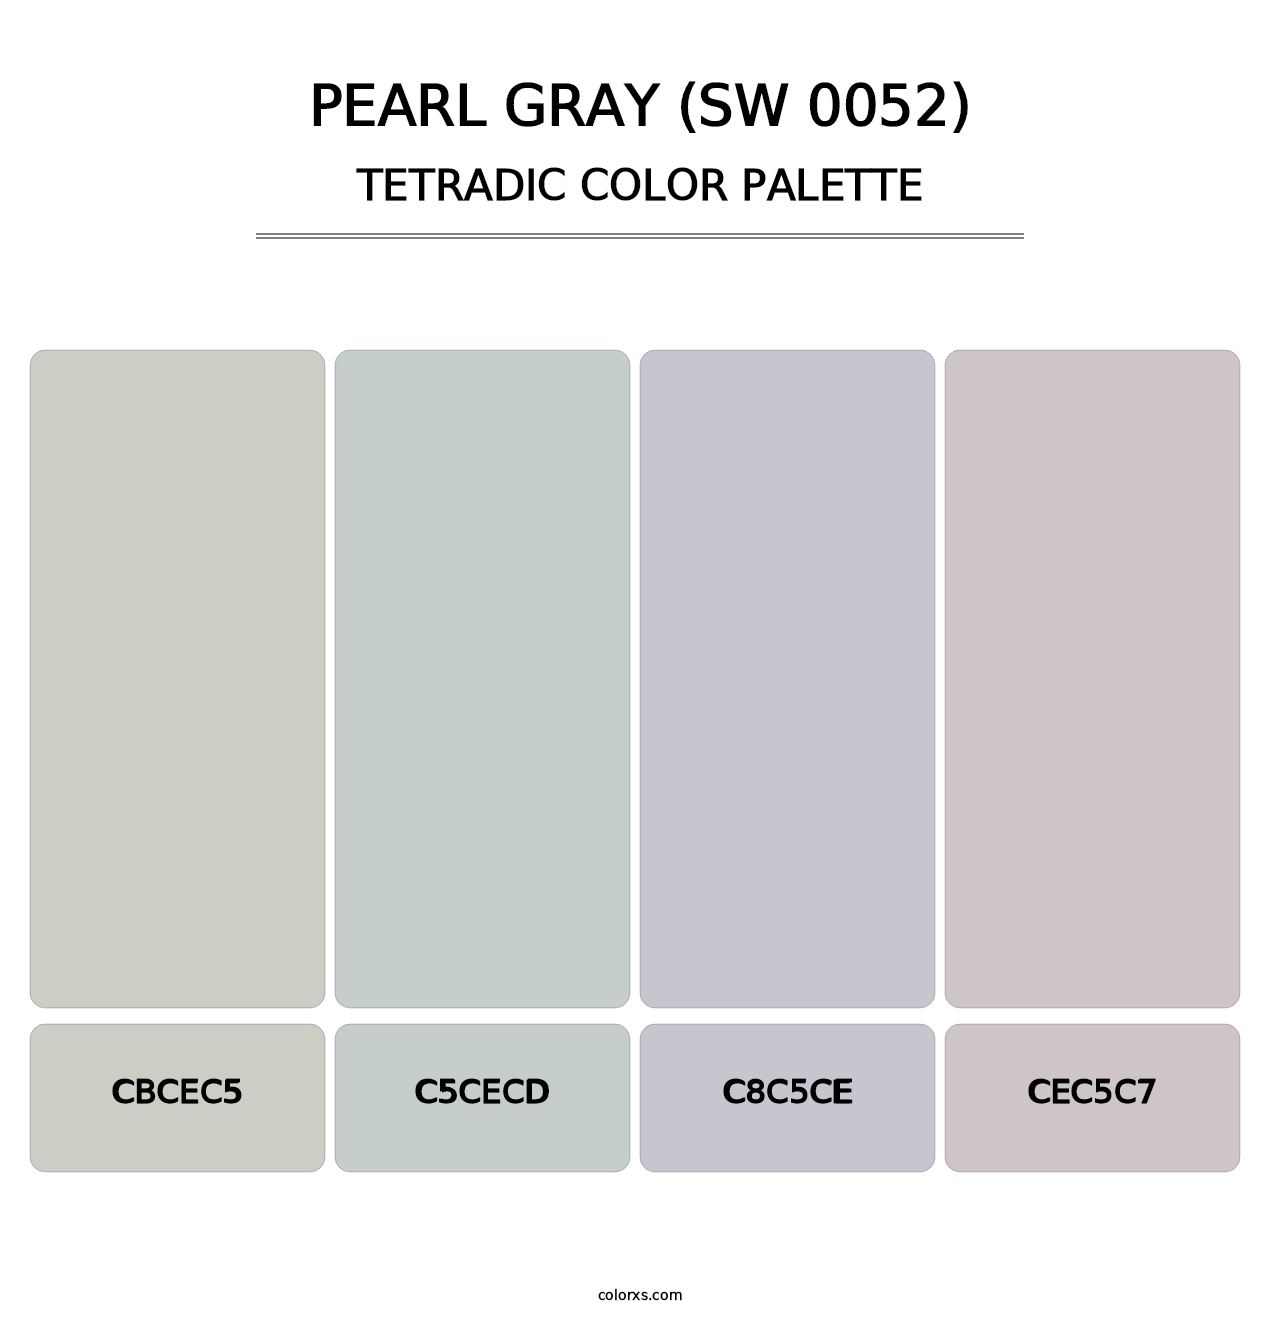 Pearl Gray (SW 0052) - Tetradic Color Palette